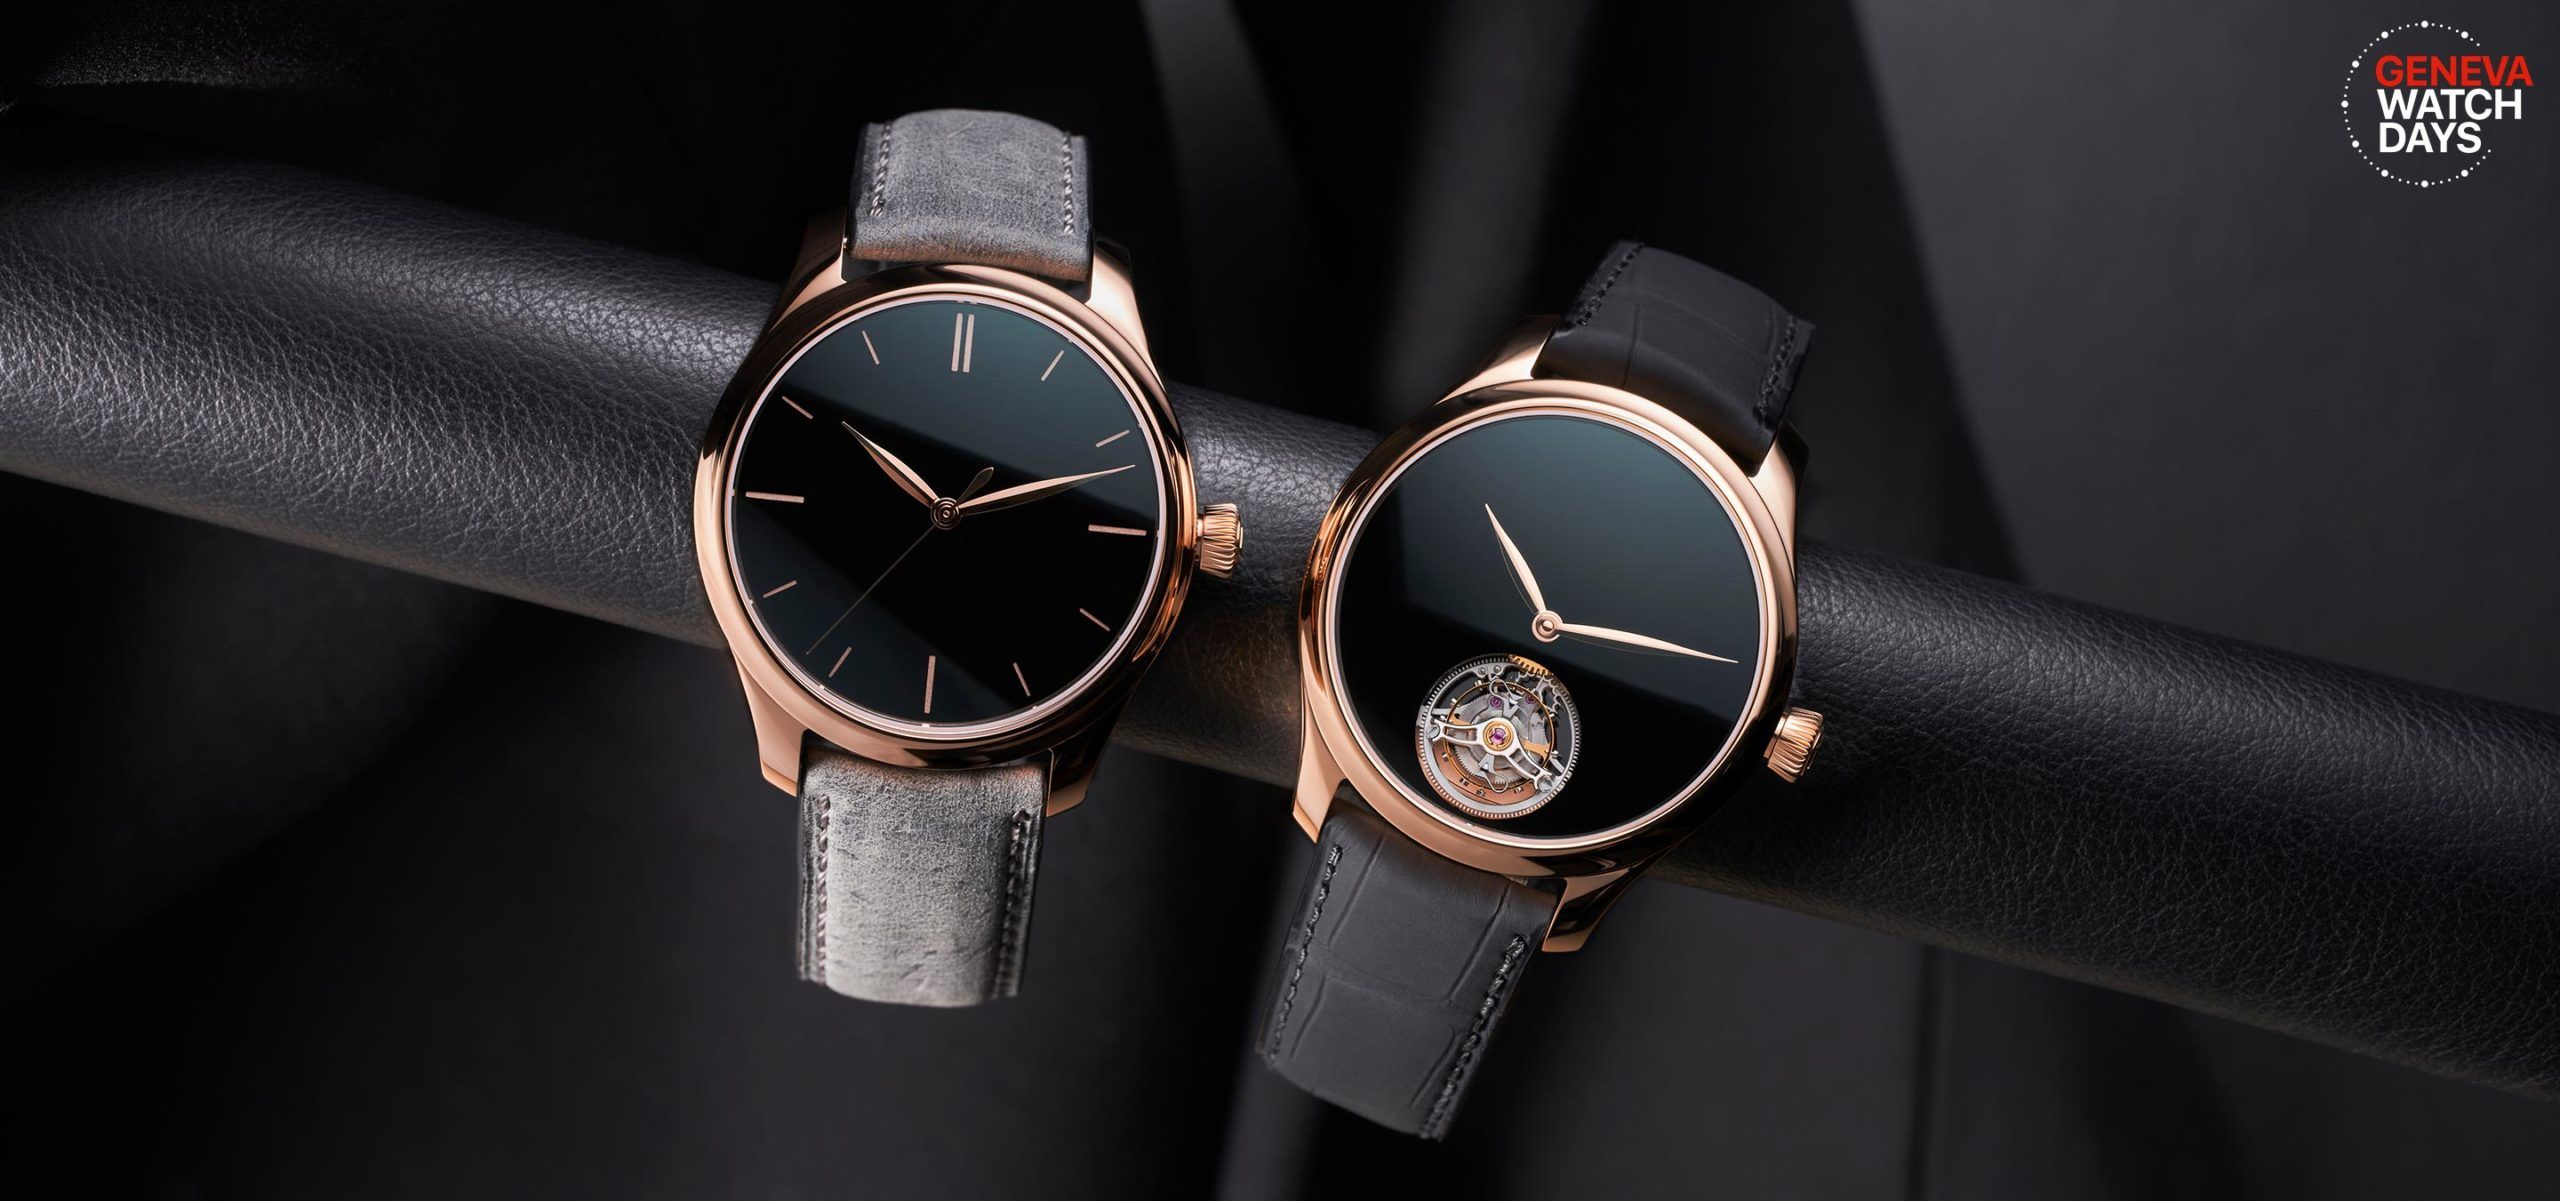 The Dark Knight Rises: H. Moser & Cie. Release Two New Endeavour Watches In Vantablack With Red Gold